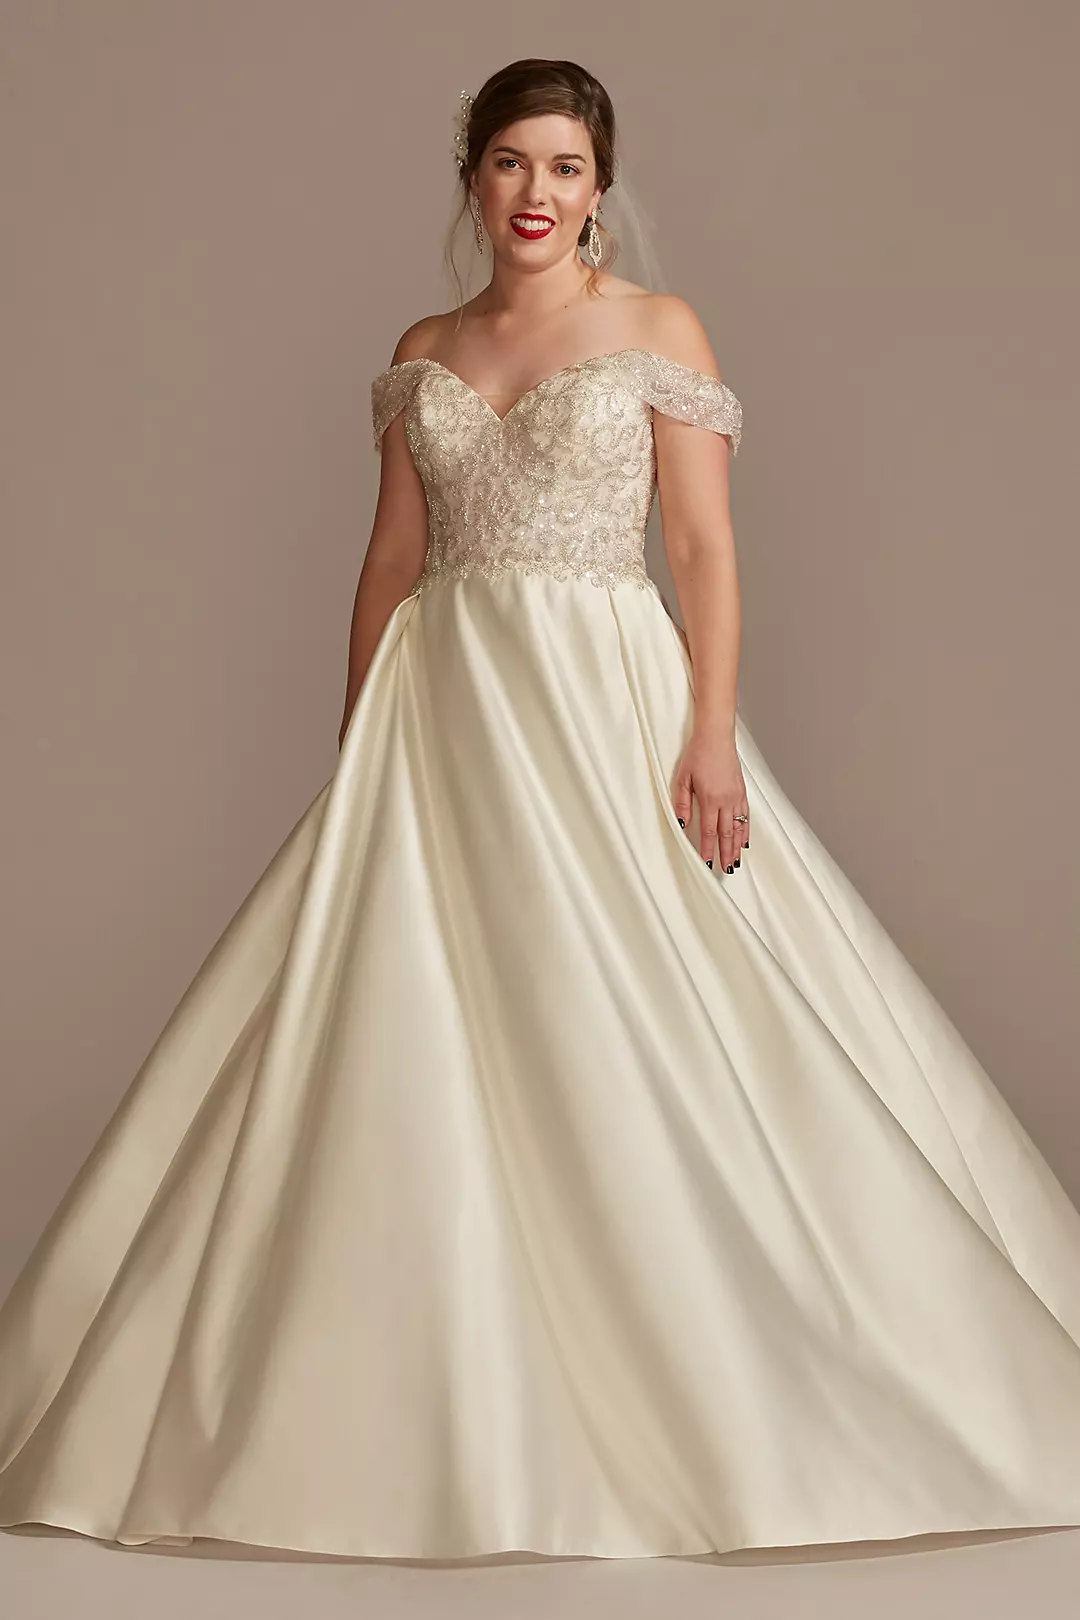 As Is Off the Shoulder Beaded Bodice Wedding Dress Image